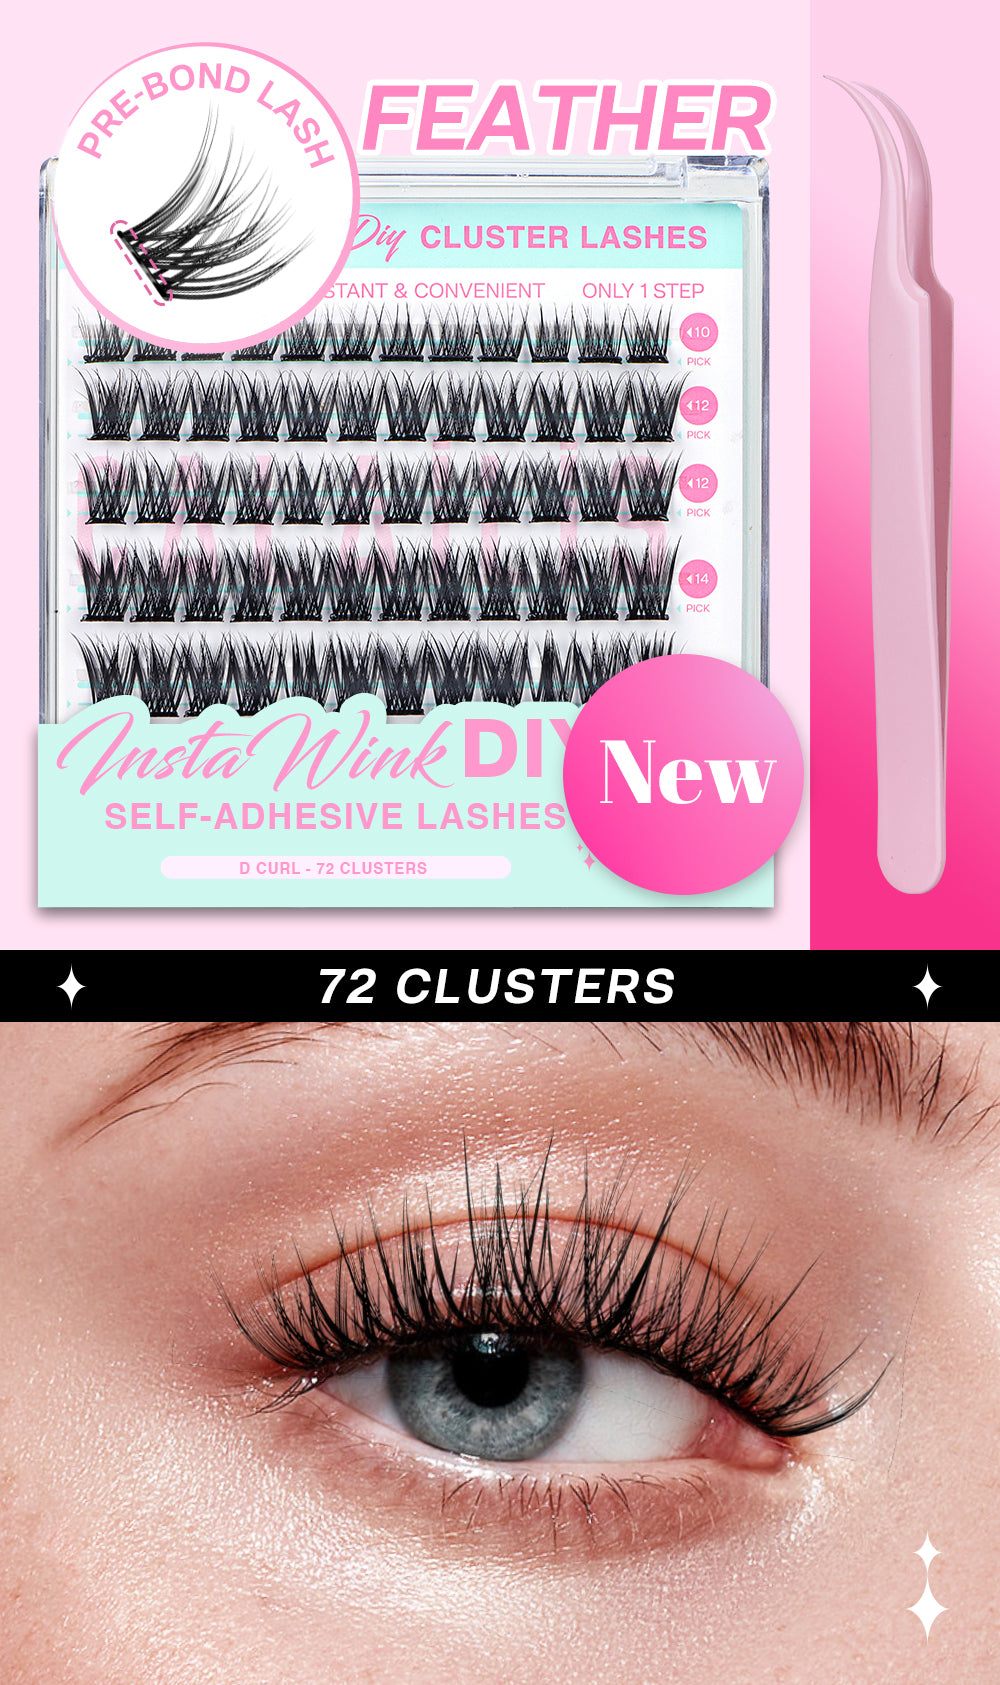 FEATHER Self-adhesive  Cluster Lashes - Calailis Beauty